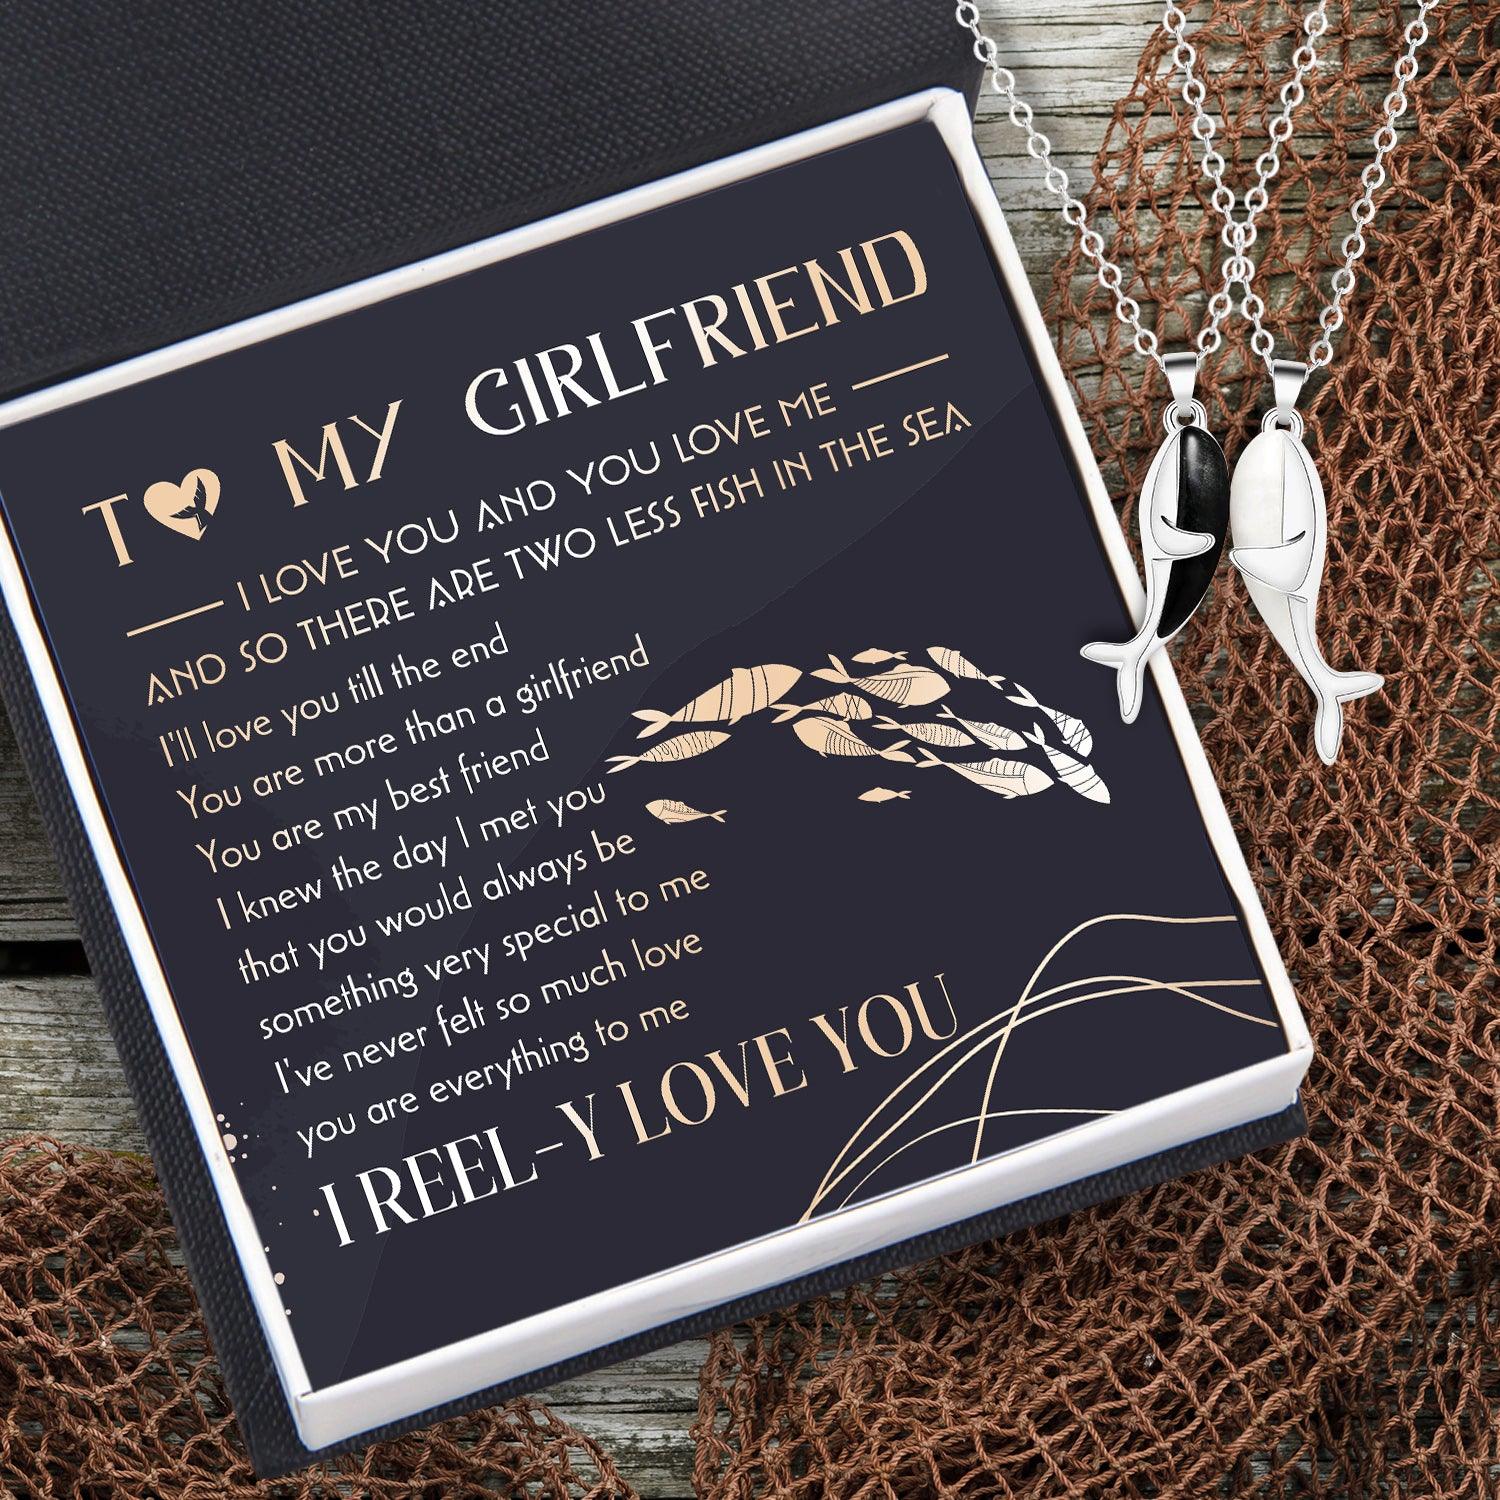 Whale Hug Couple Necklace - Fishing - To My Girlfriend - I'll Love You Till The End - Augngd13004 - Gifts Holder